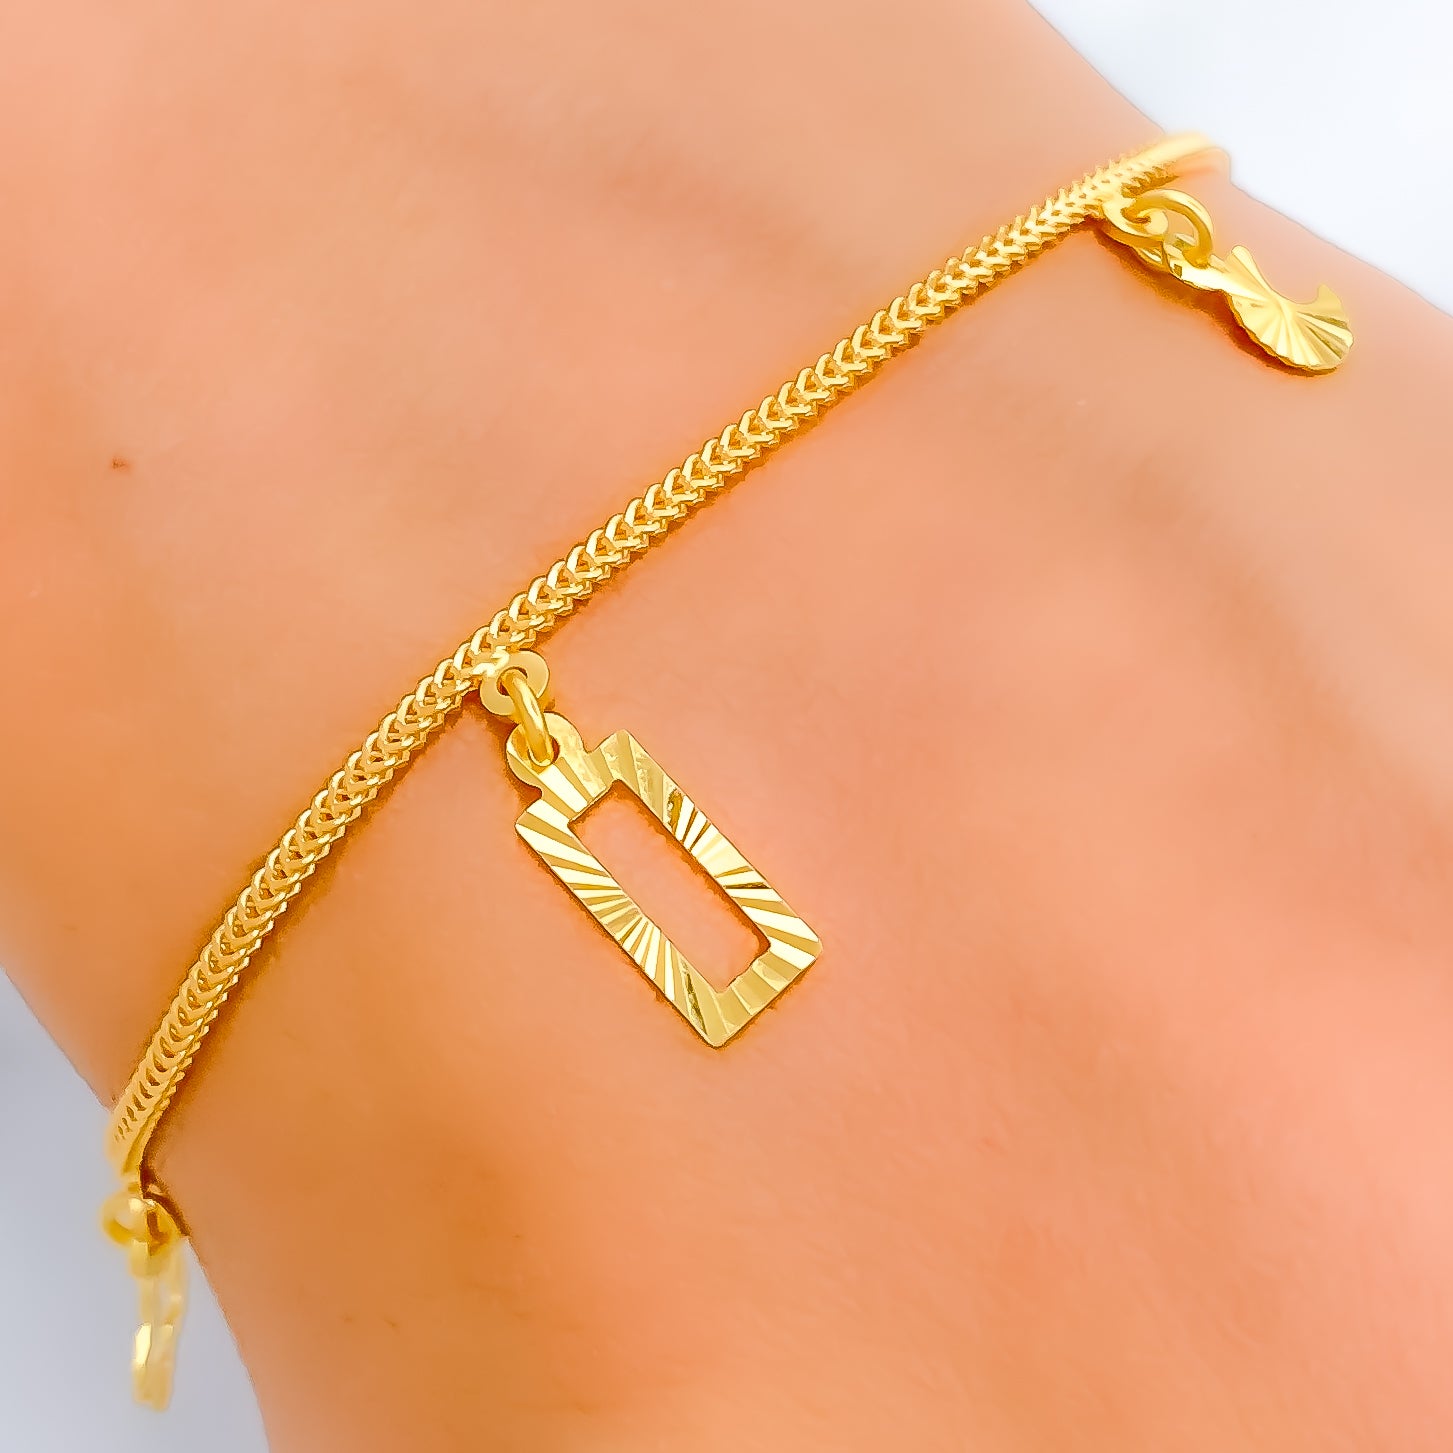 22K Gold Charm Bangle (9.45G) - Queen of Hearts Jewelry